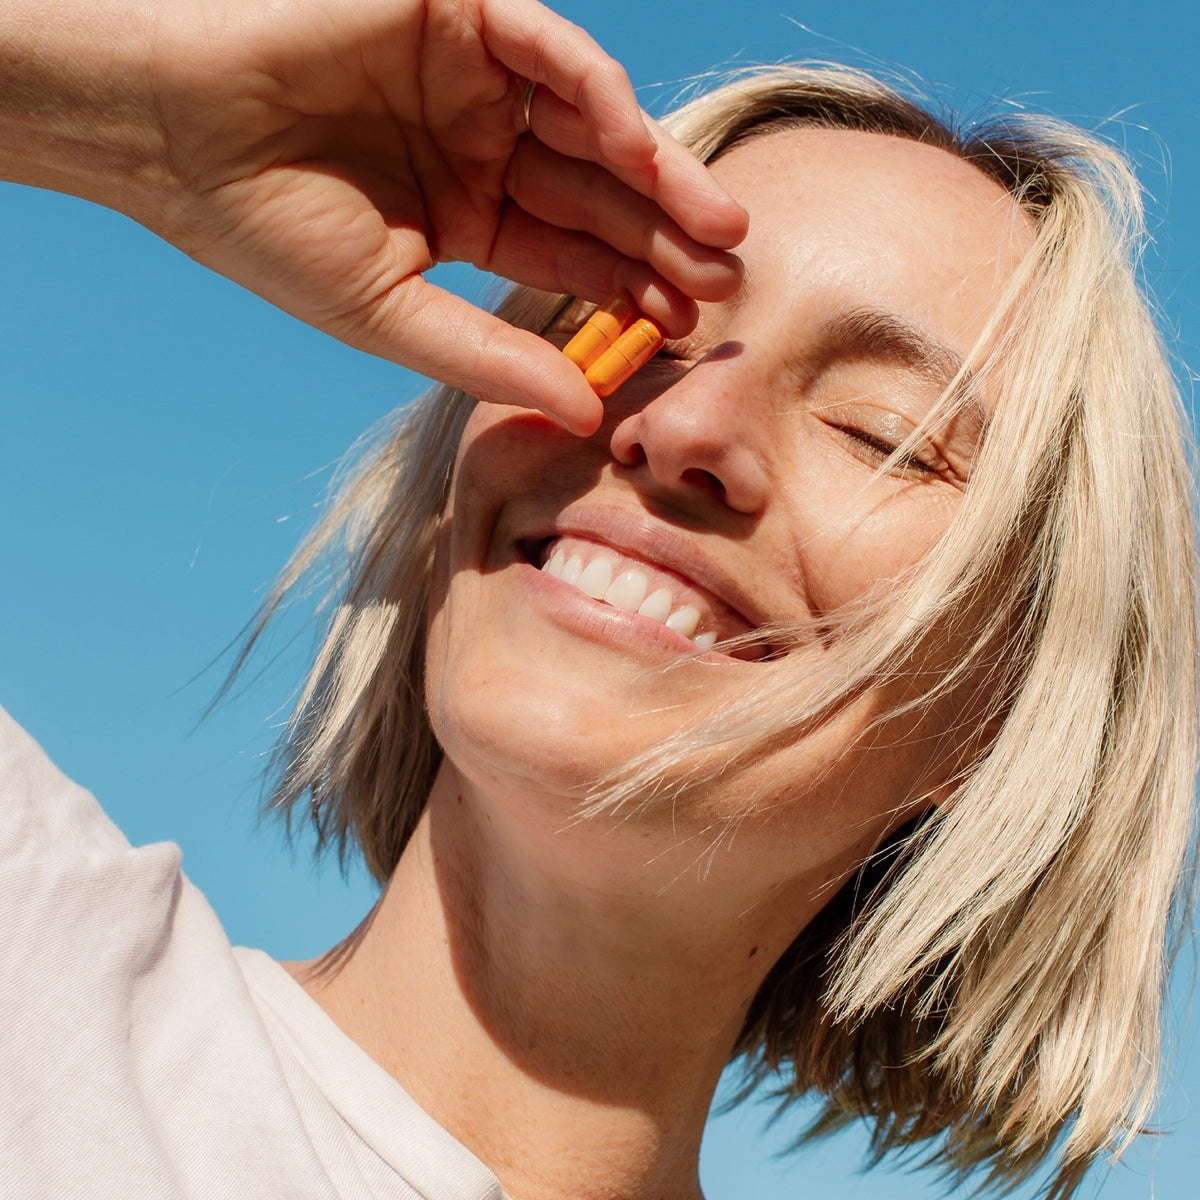 A smiling woman with short blonde hair, holding a Kinder Thoughts supplement capsule between her fingers close to her face, under a clear blue sky.